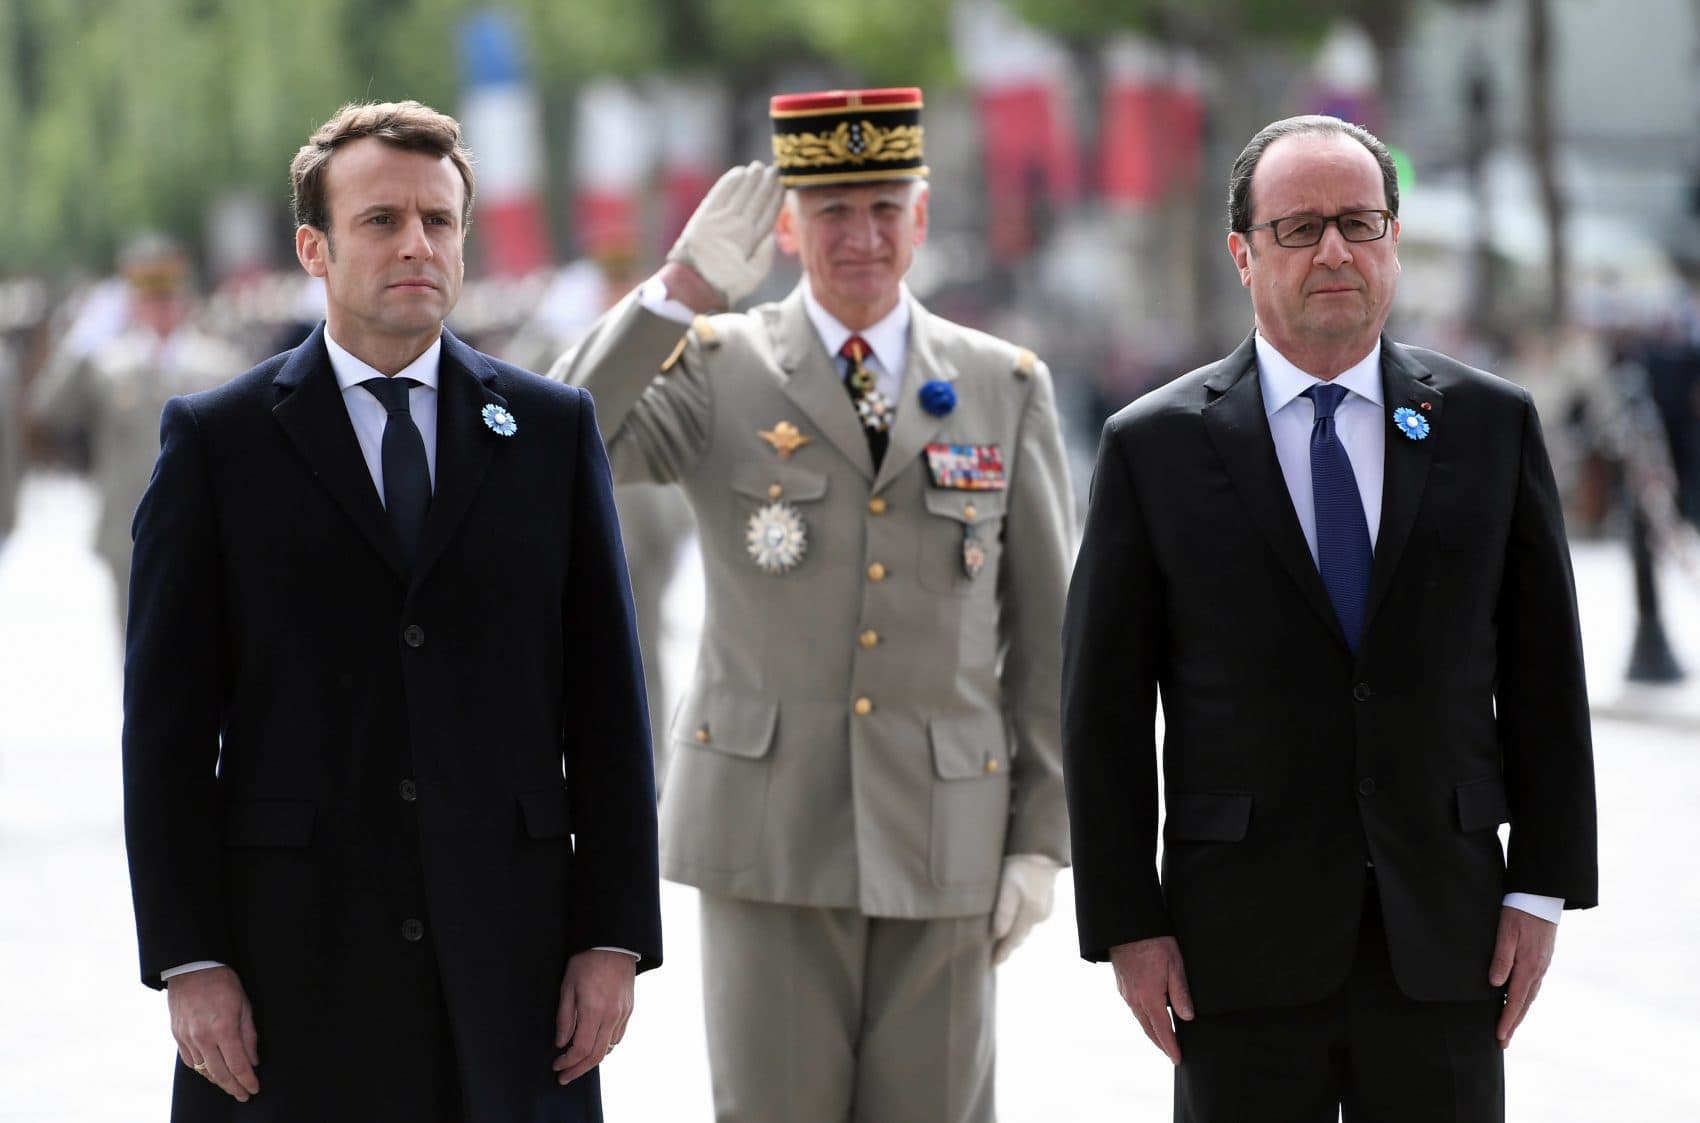 Can the new president bring change to a country where intolerance is very much alive? asks Régine Michelle Jean-Charles. Pictured: French President-elect Emmanuel Macron, left, an current President Francois Hollande, right, attend a ceremony to mark the end of World War II at the Arc de Triomphe in Paris, Monday, May 8, 2017. Macron defeated far-right leader Marine Le Pen handily in Sunday's presidential vote, and now must pull together a majority for his year-old political movement by mid-June legislative elections. (Stepahne de Sakutin, Pool via AP)